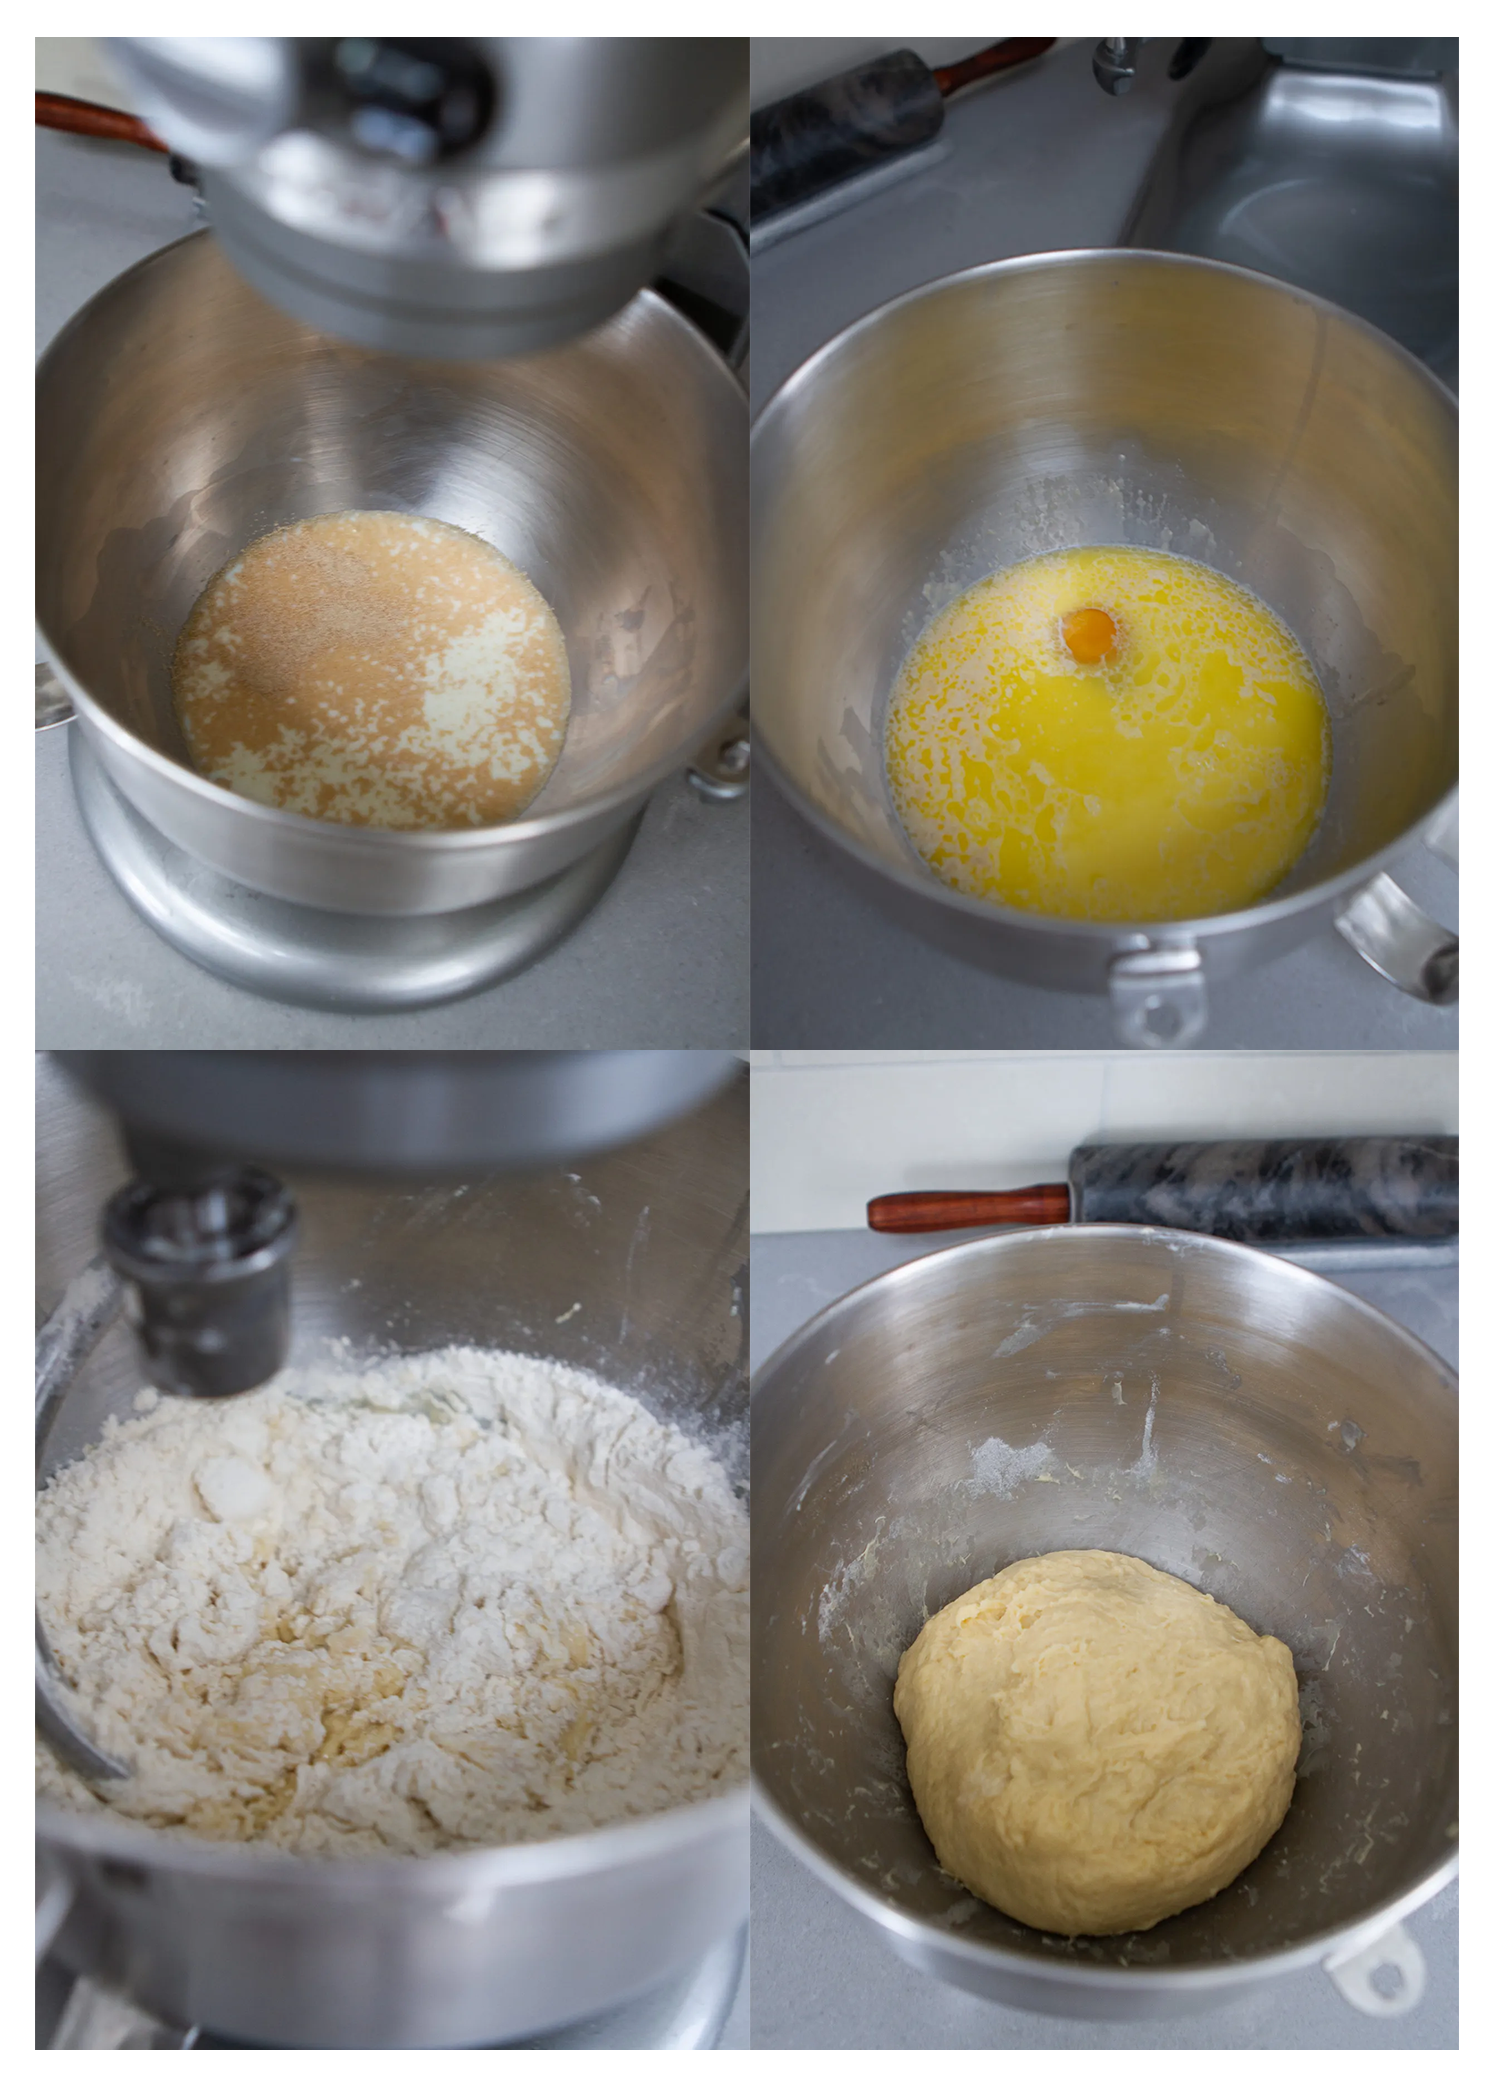 steps for sweet yeast dough